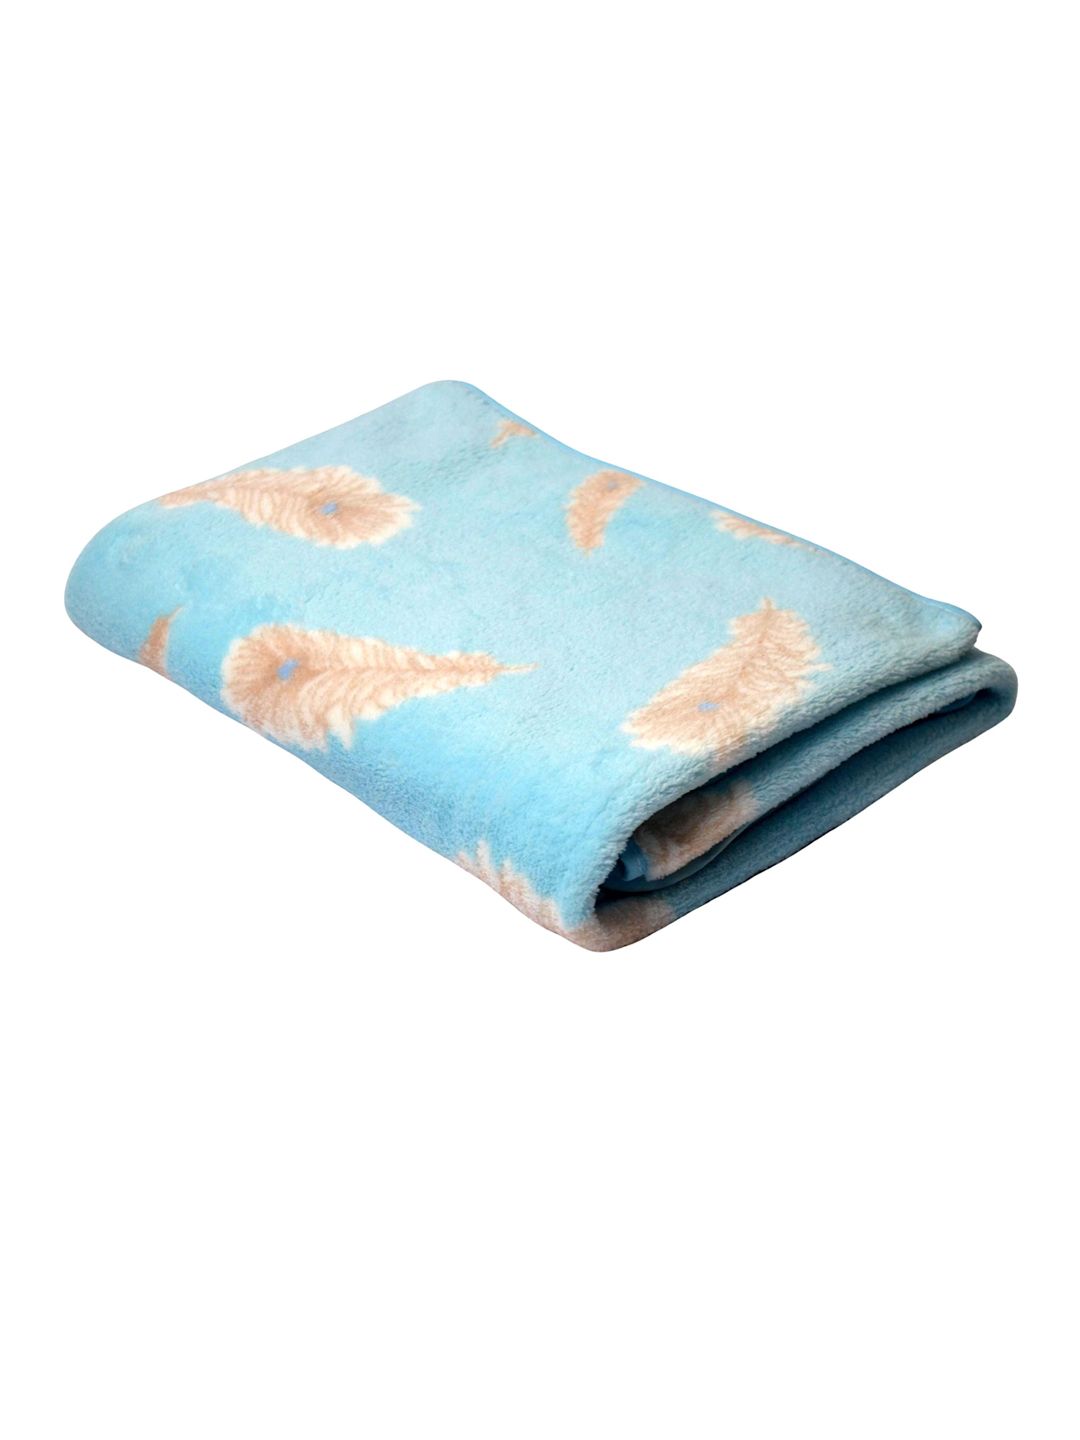 Tranquil square Blue Floral Printed 650 GSM Cotton Rectangular Bath Towels Price in India